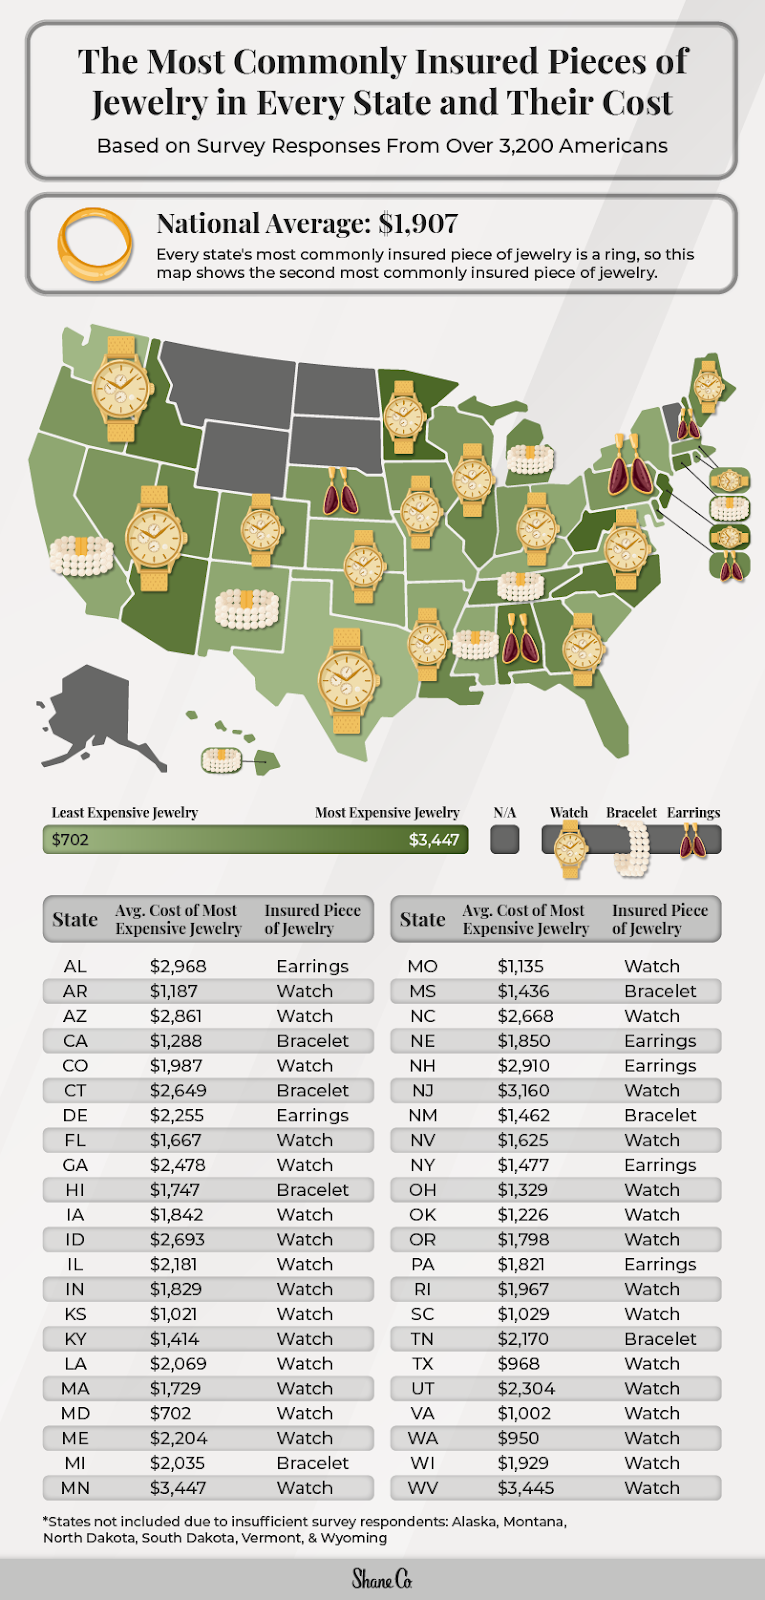 A U.S. map showing each state’s most commonly insured piece of jewelry and its cost.